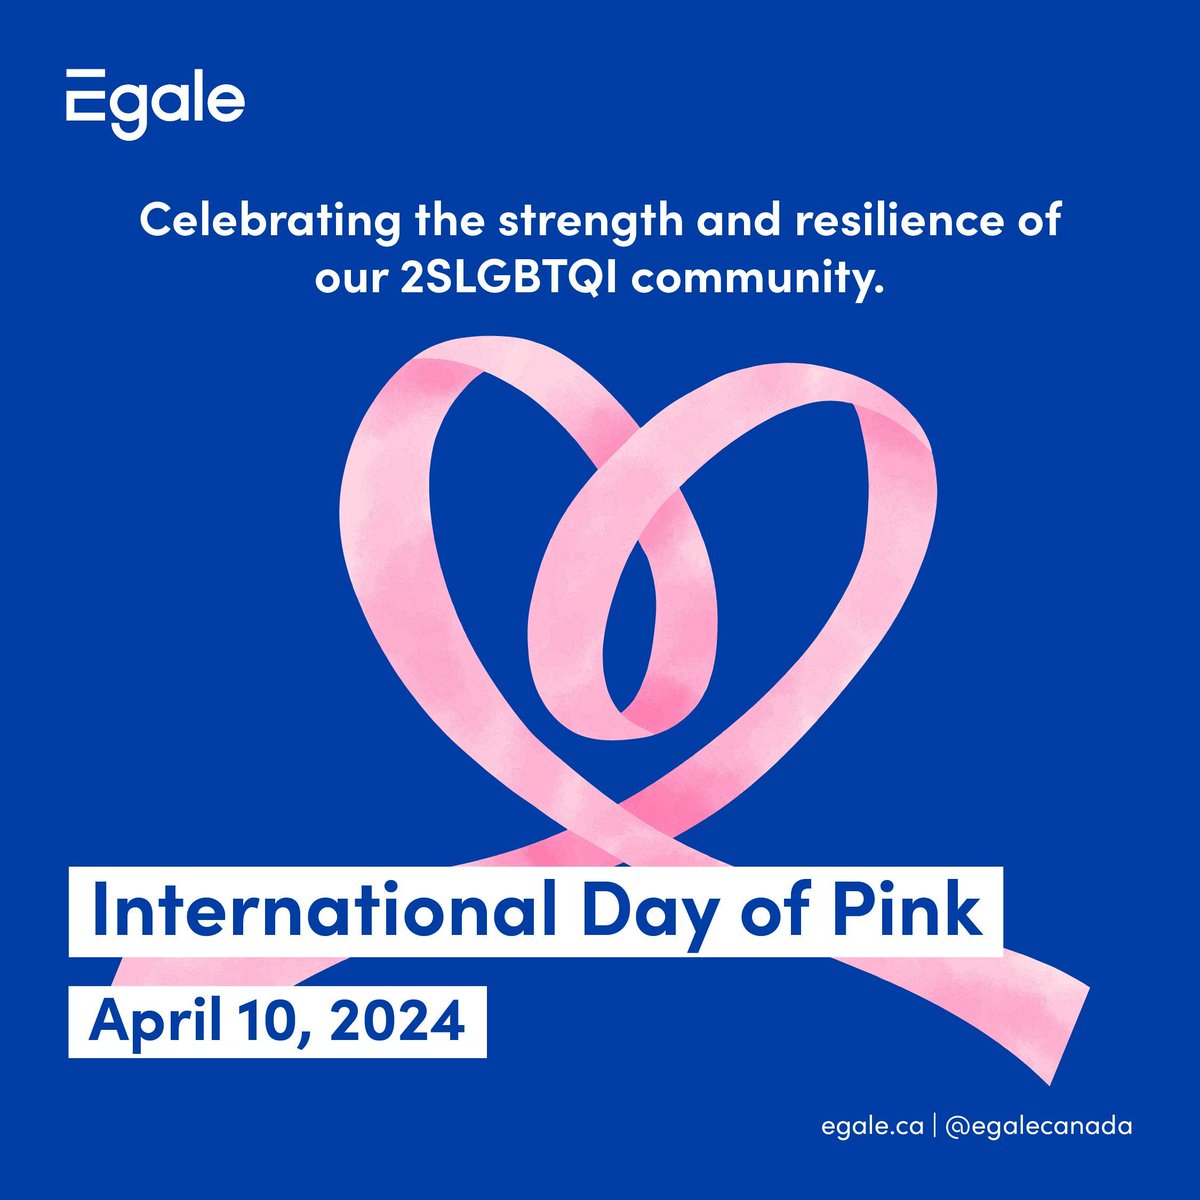 Today, we reaffirm our commitment to creating a world where everyone can live authentically and proudly. Let's celebrate our differences and stand up against discrimination in all its forms. Happy #InternationalDayofPink! Let's spread love and acceptance far and wide.